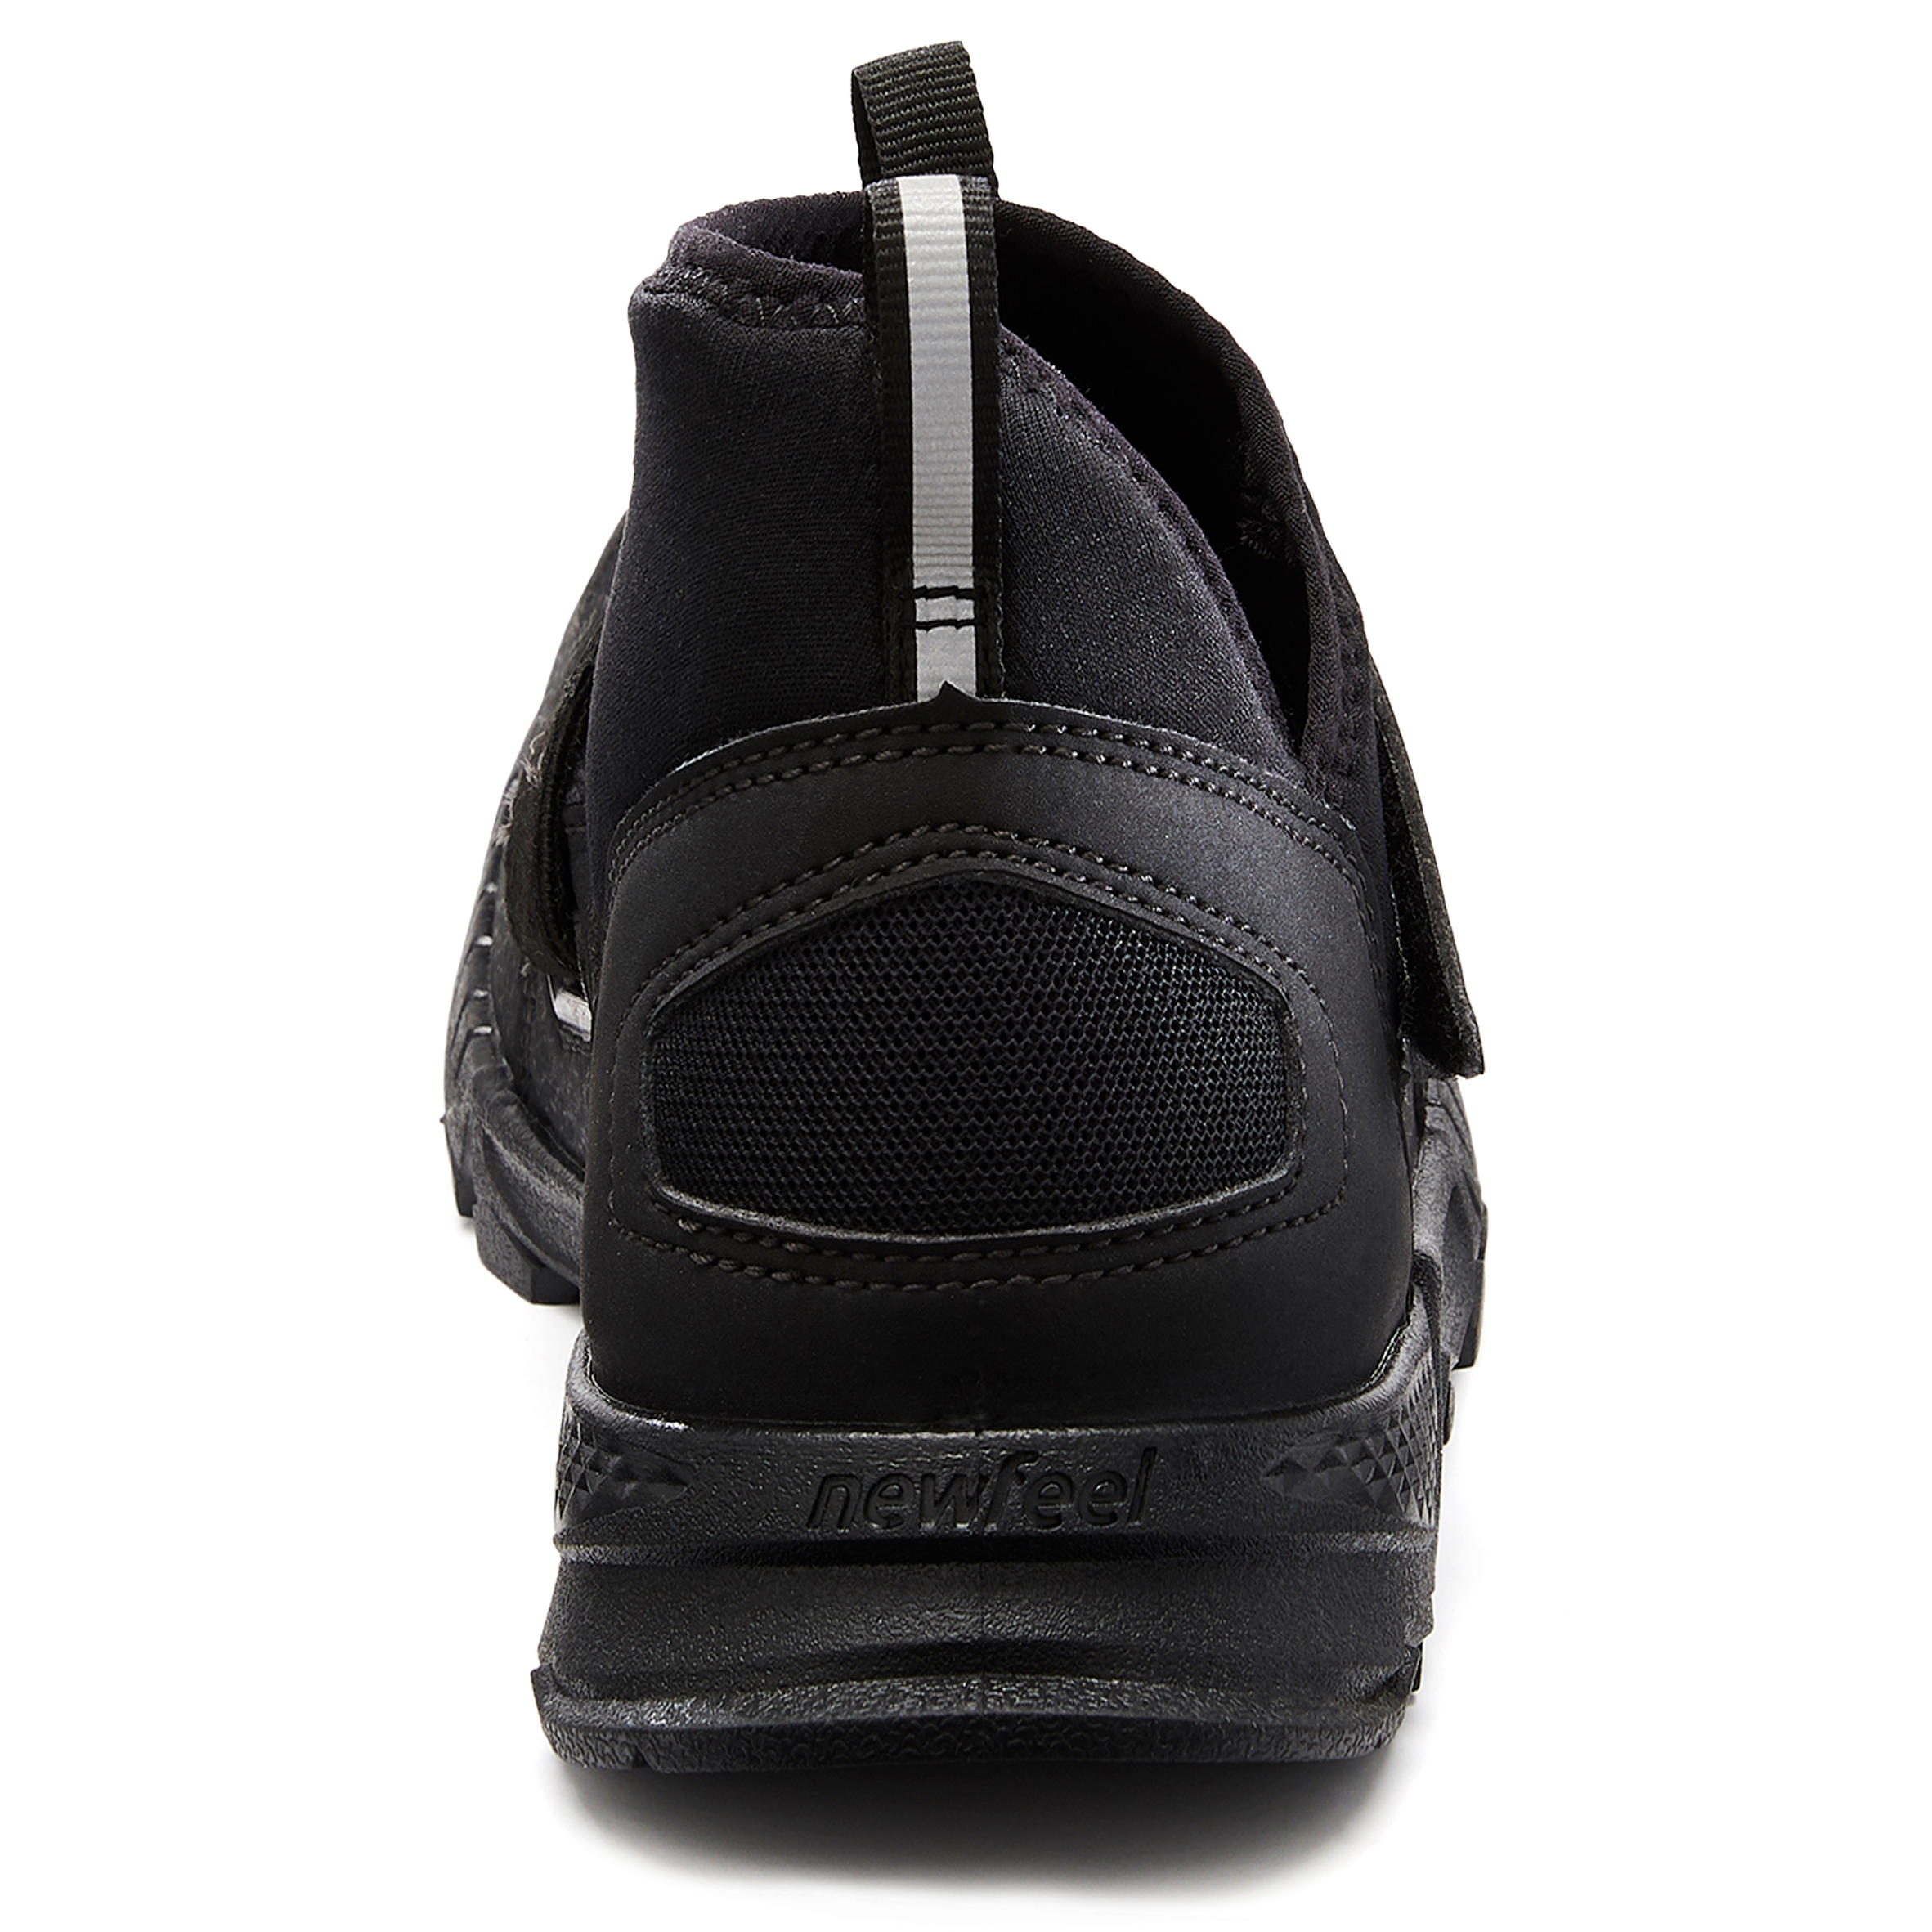 NW 100 Nordic Walking Breathable Shoes - Black 4/8